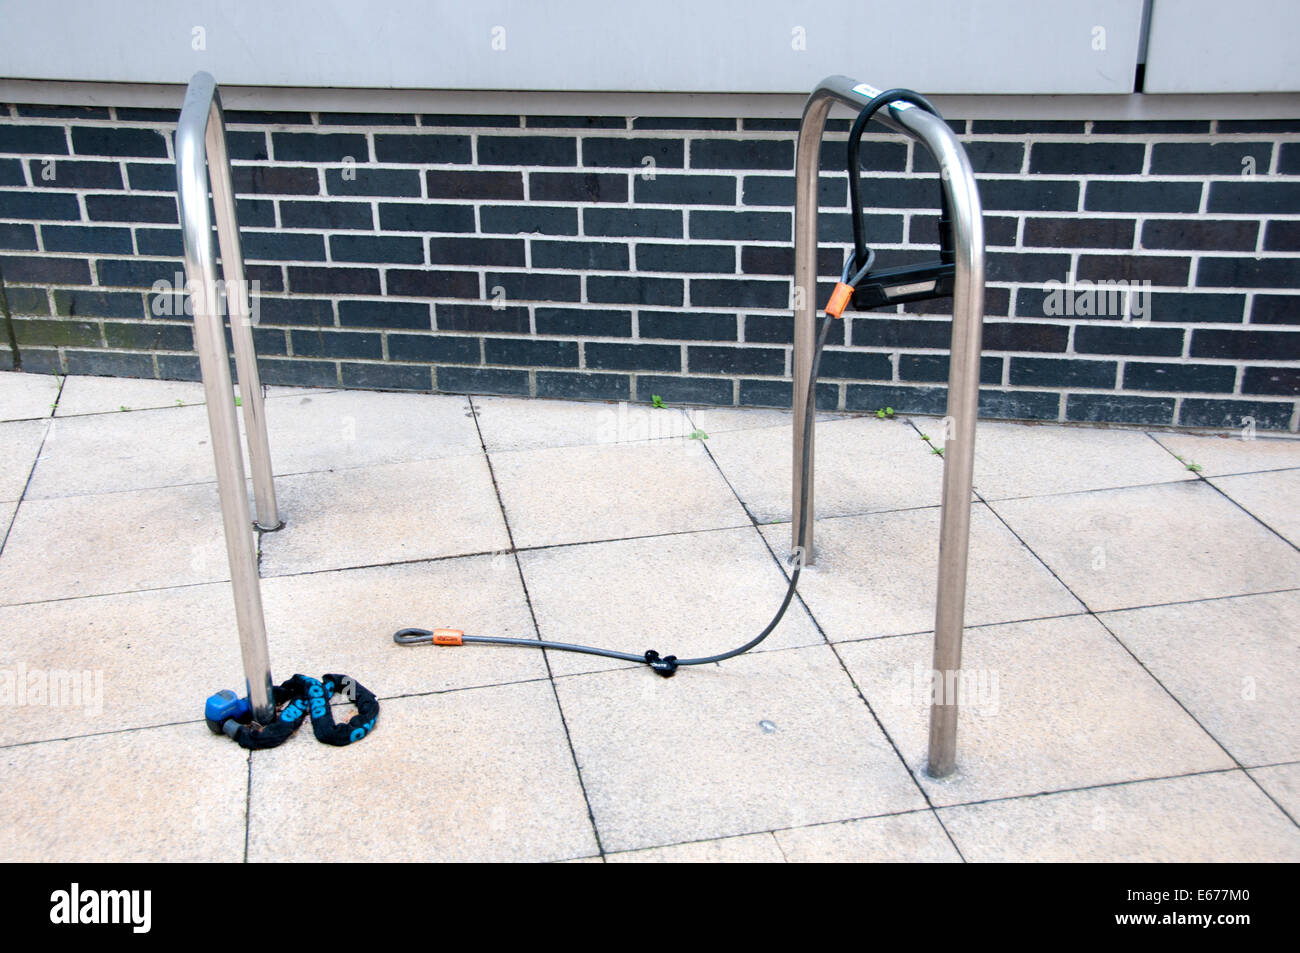 Hackney Central Library bicycle racks with locks left behind after bikes were stolen. Stock Photo